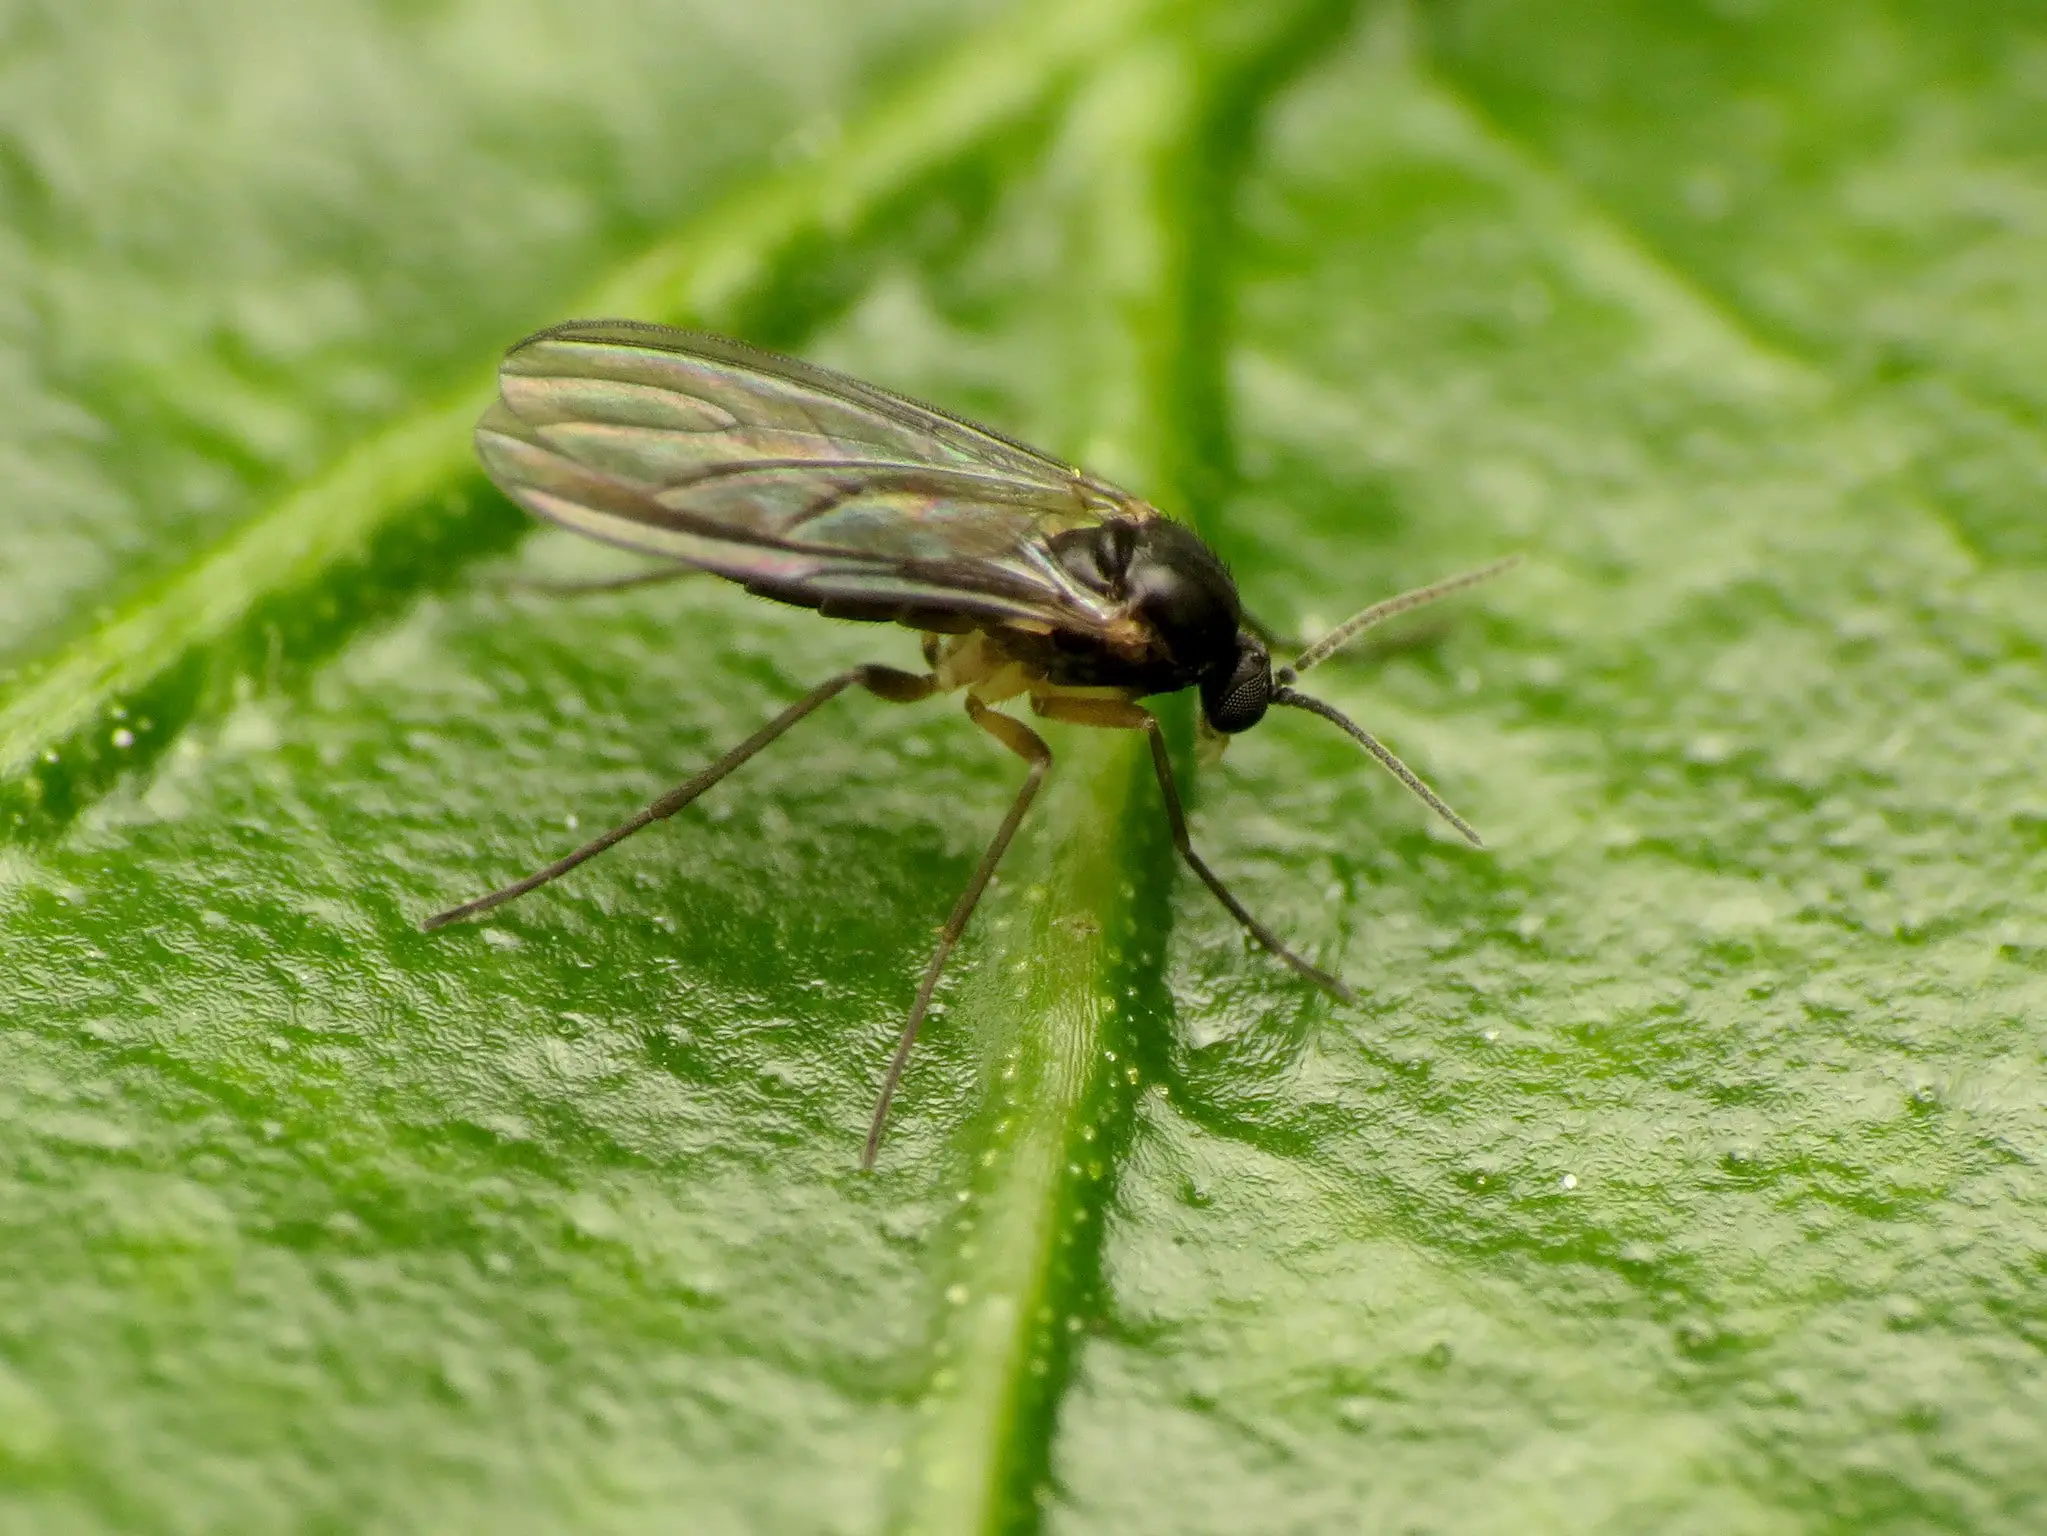 How to protect plants from the black fly?